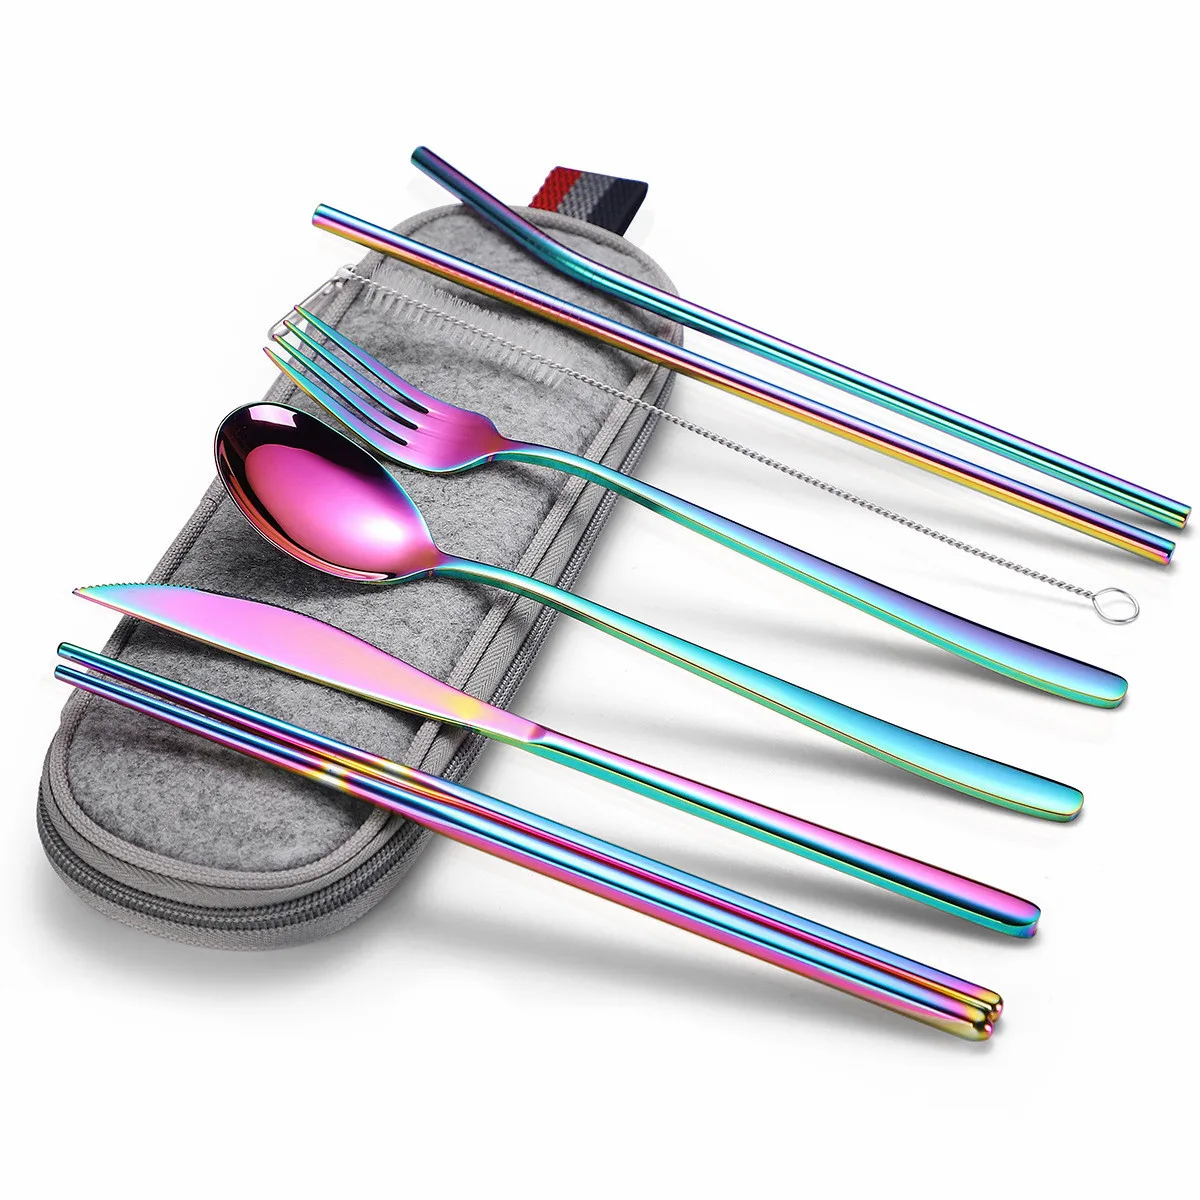 

Travel Cutlery Set Reusable Stainless Steel Cutlery Complete Stainless Steel Forks Knives Cutlery with Pouch Rose Gold Flatware